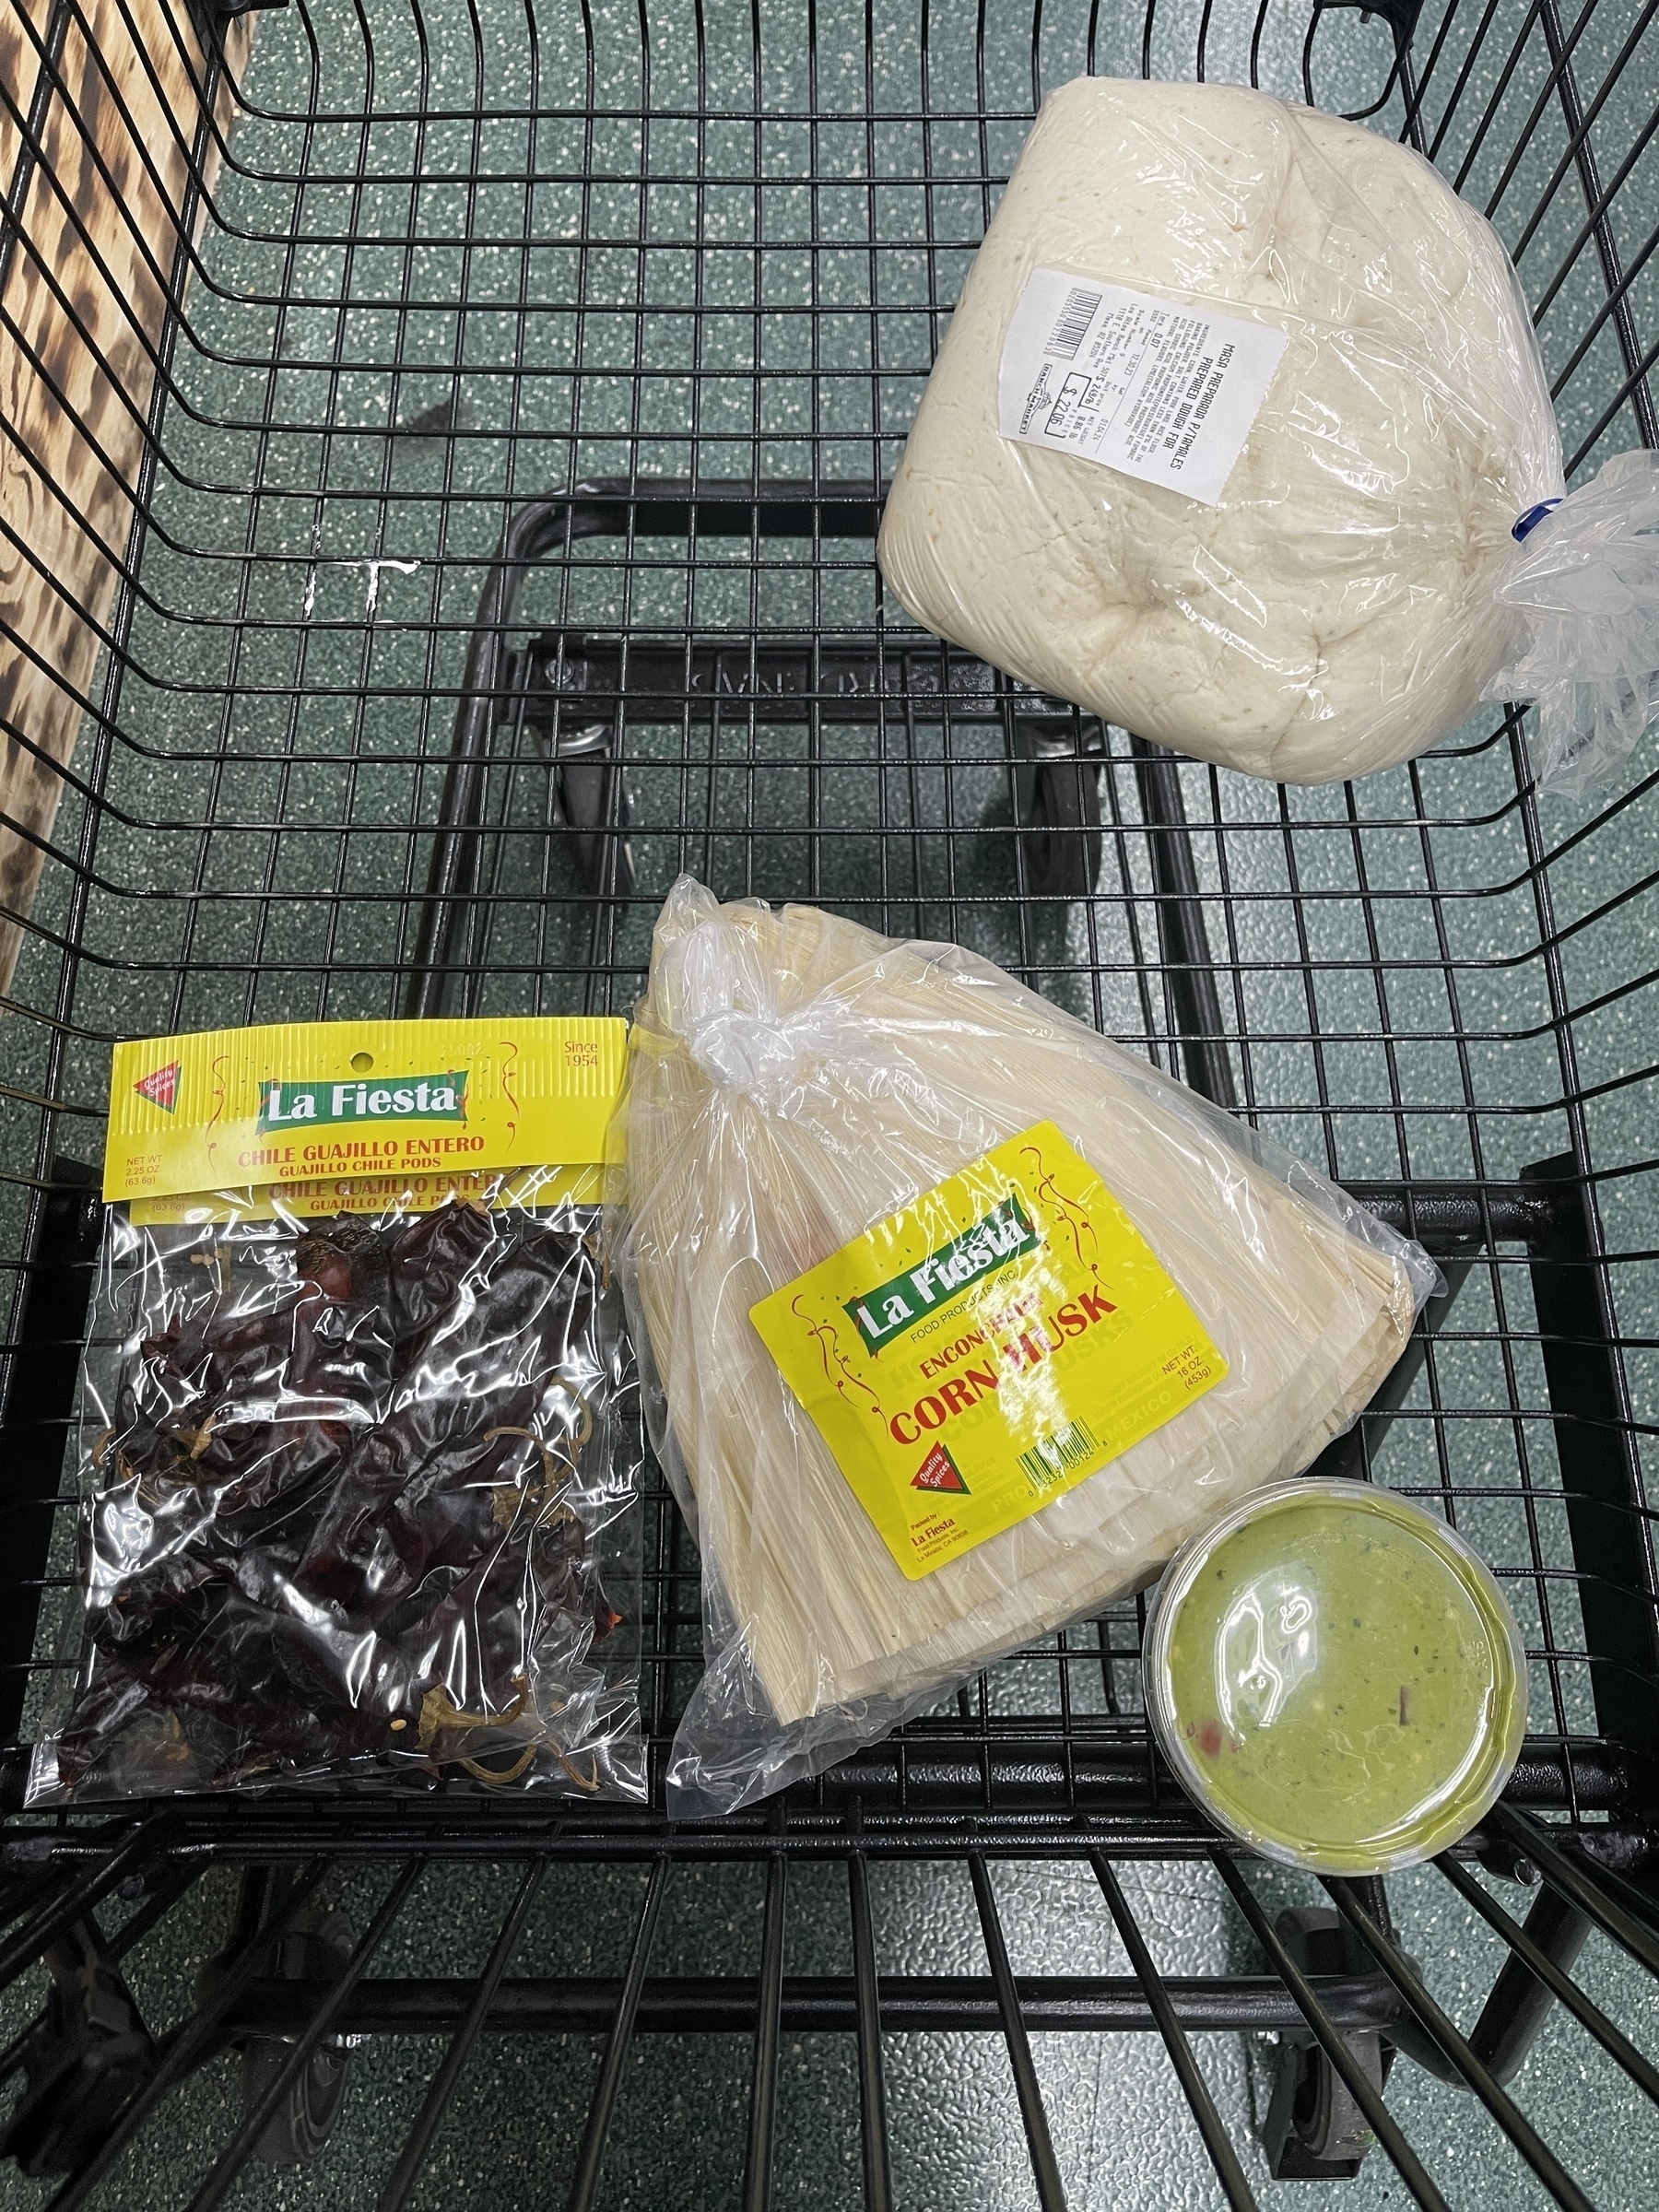 A photo of of a shopping cart full of tamales supplies, including 8 pounds of masa.